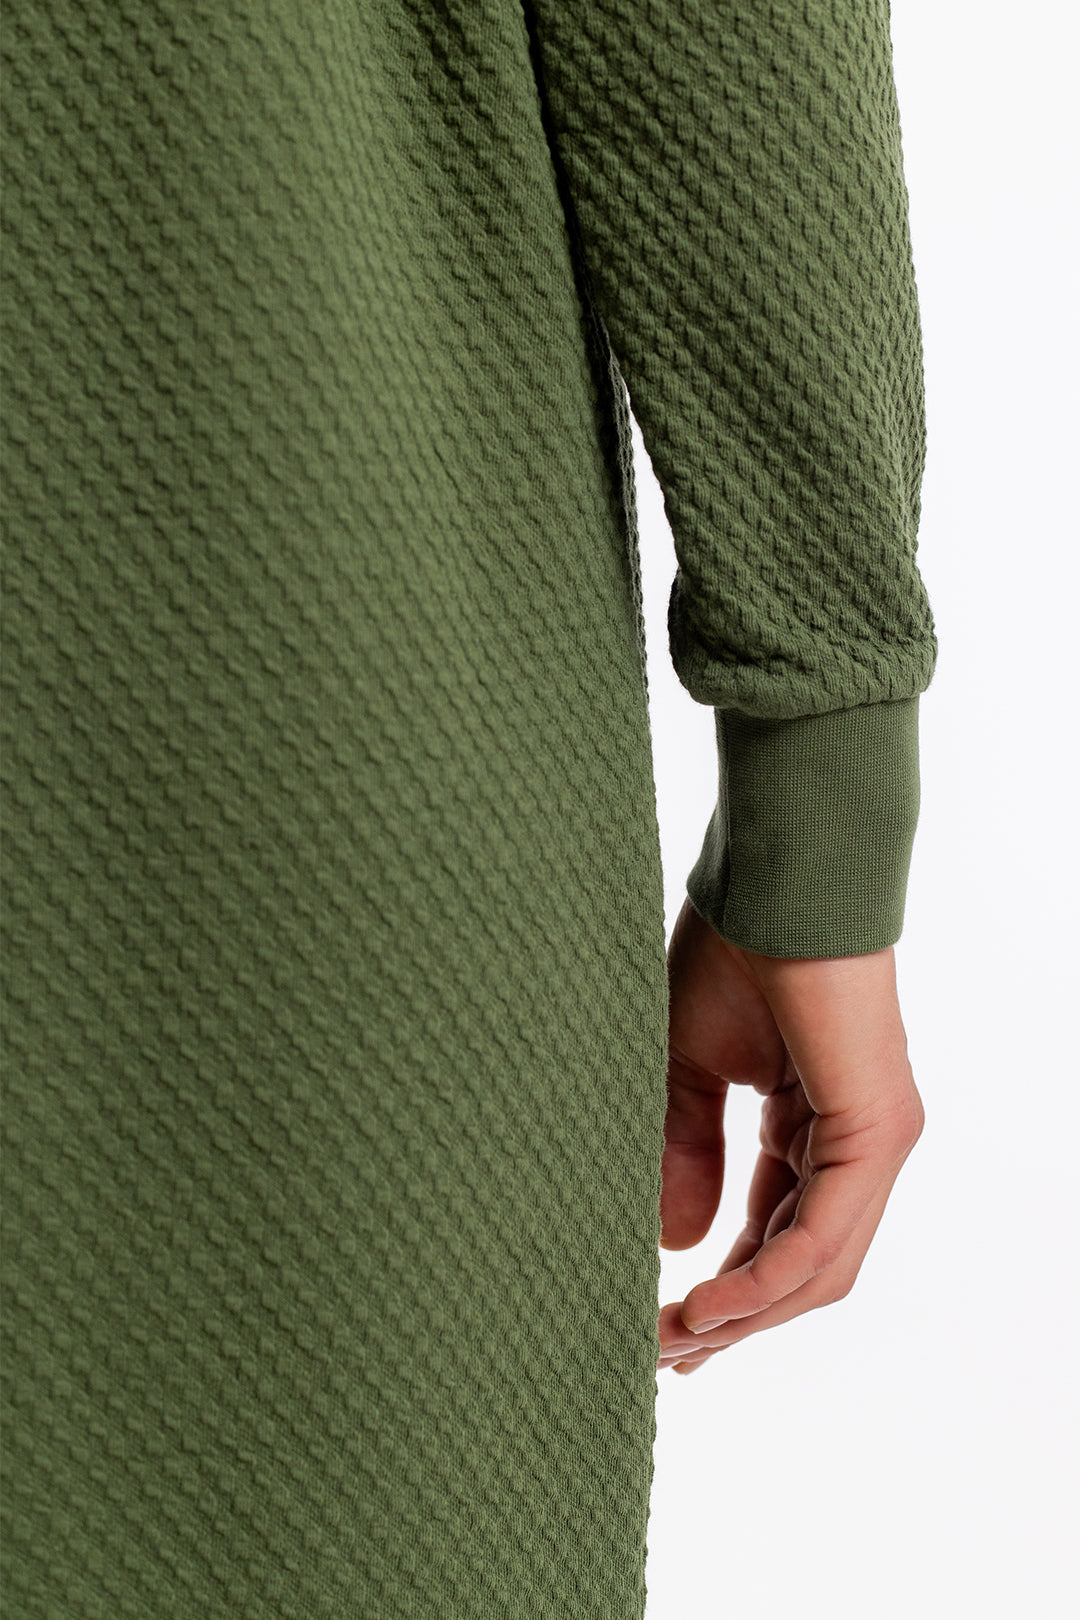 Green sweatshirt dress made from 100% organic cotton from Rotholz